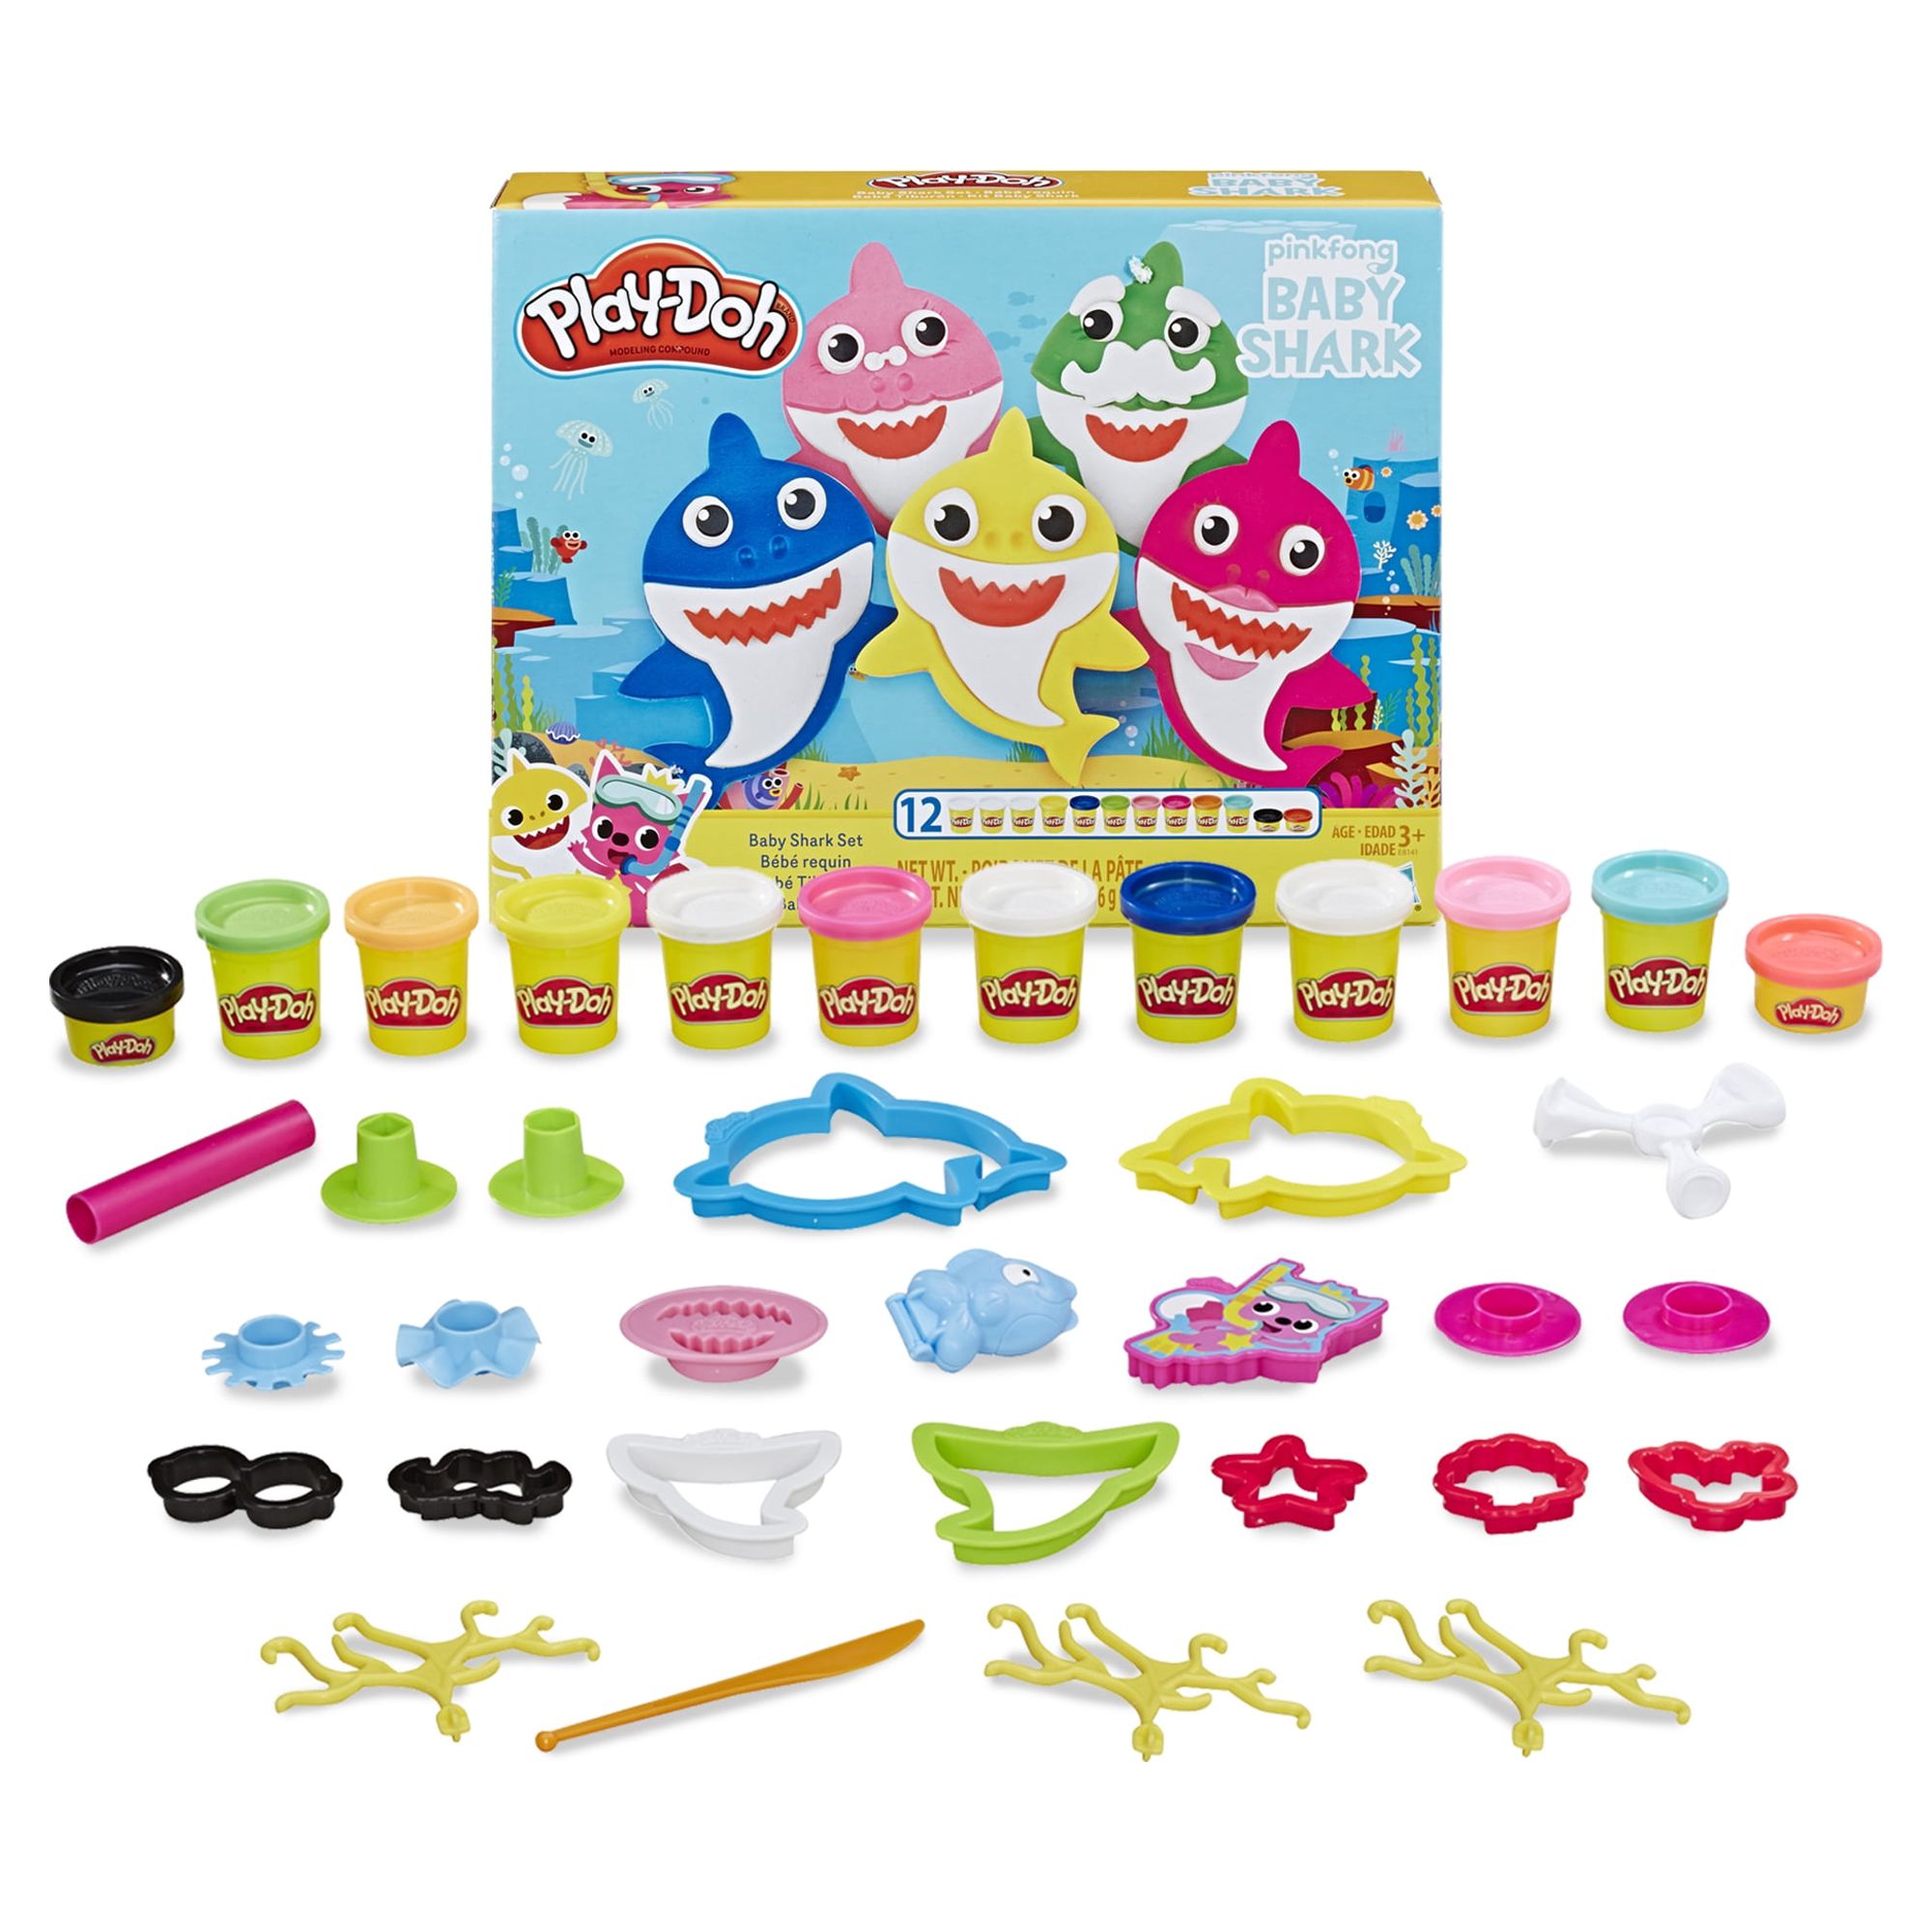 Play-Doh Pinkfong Baby Shark Set with 12 Non-Toxic Cans (22 oz) - image 1 of 8